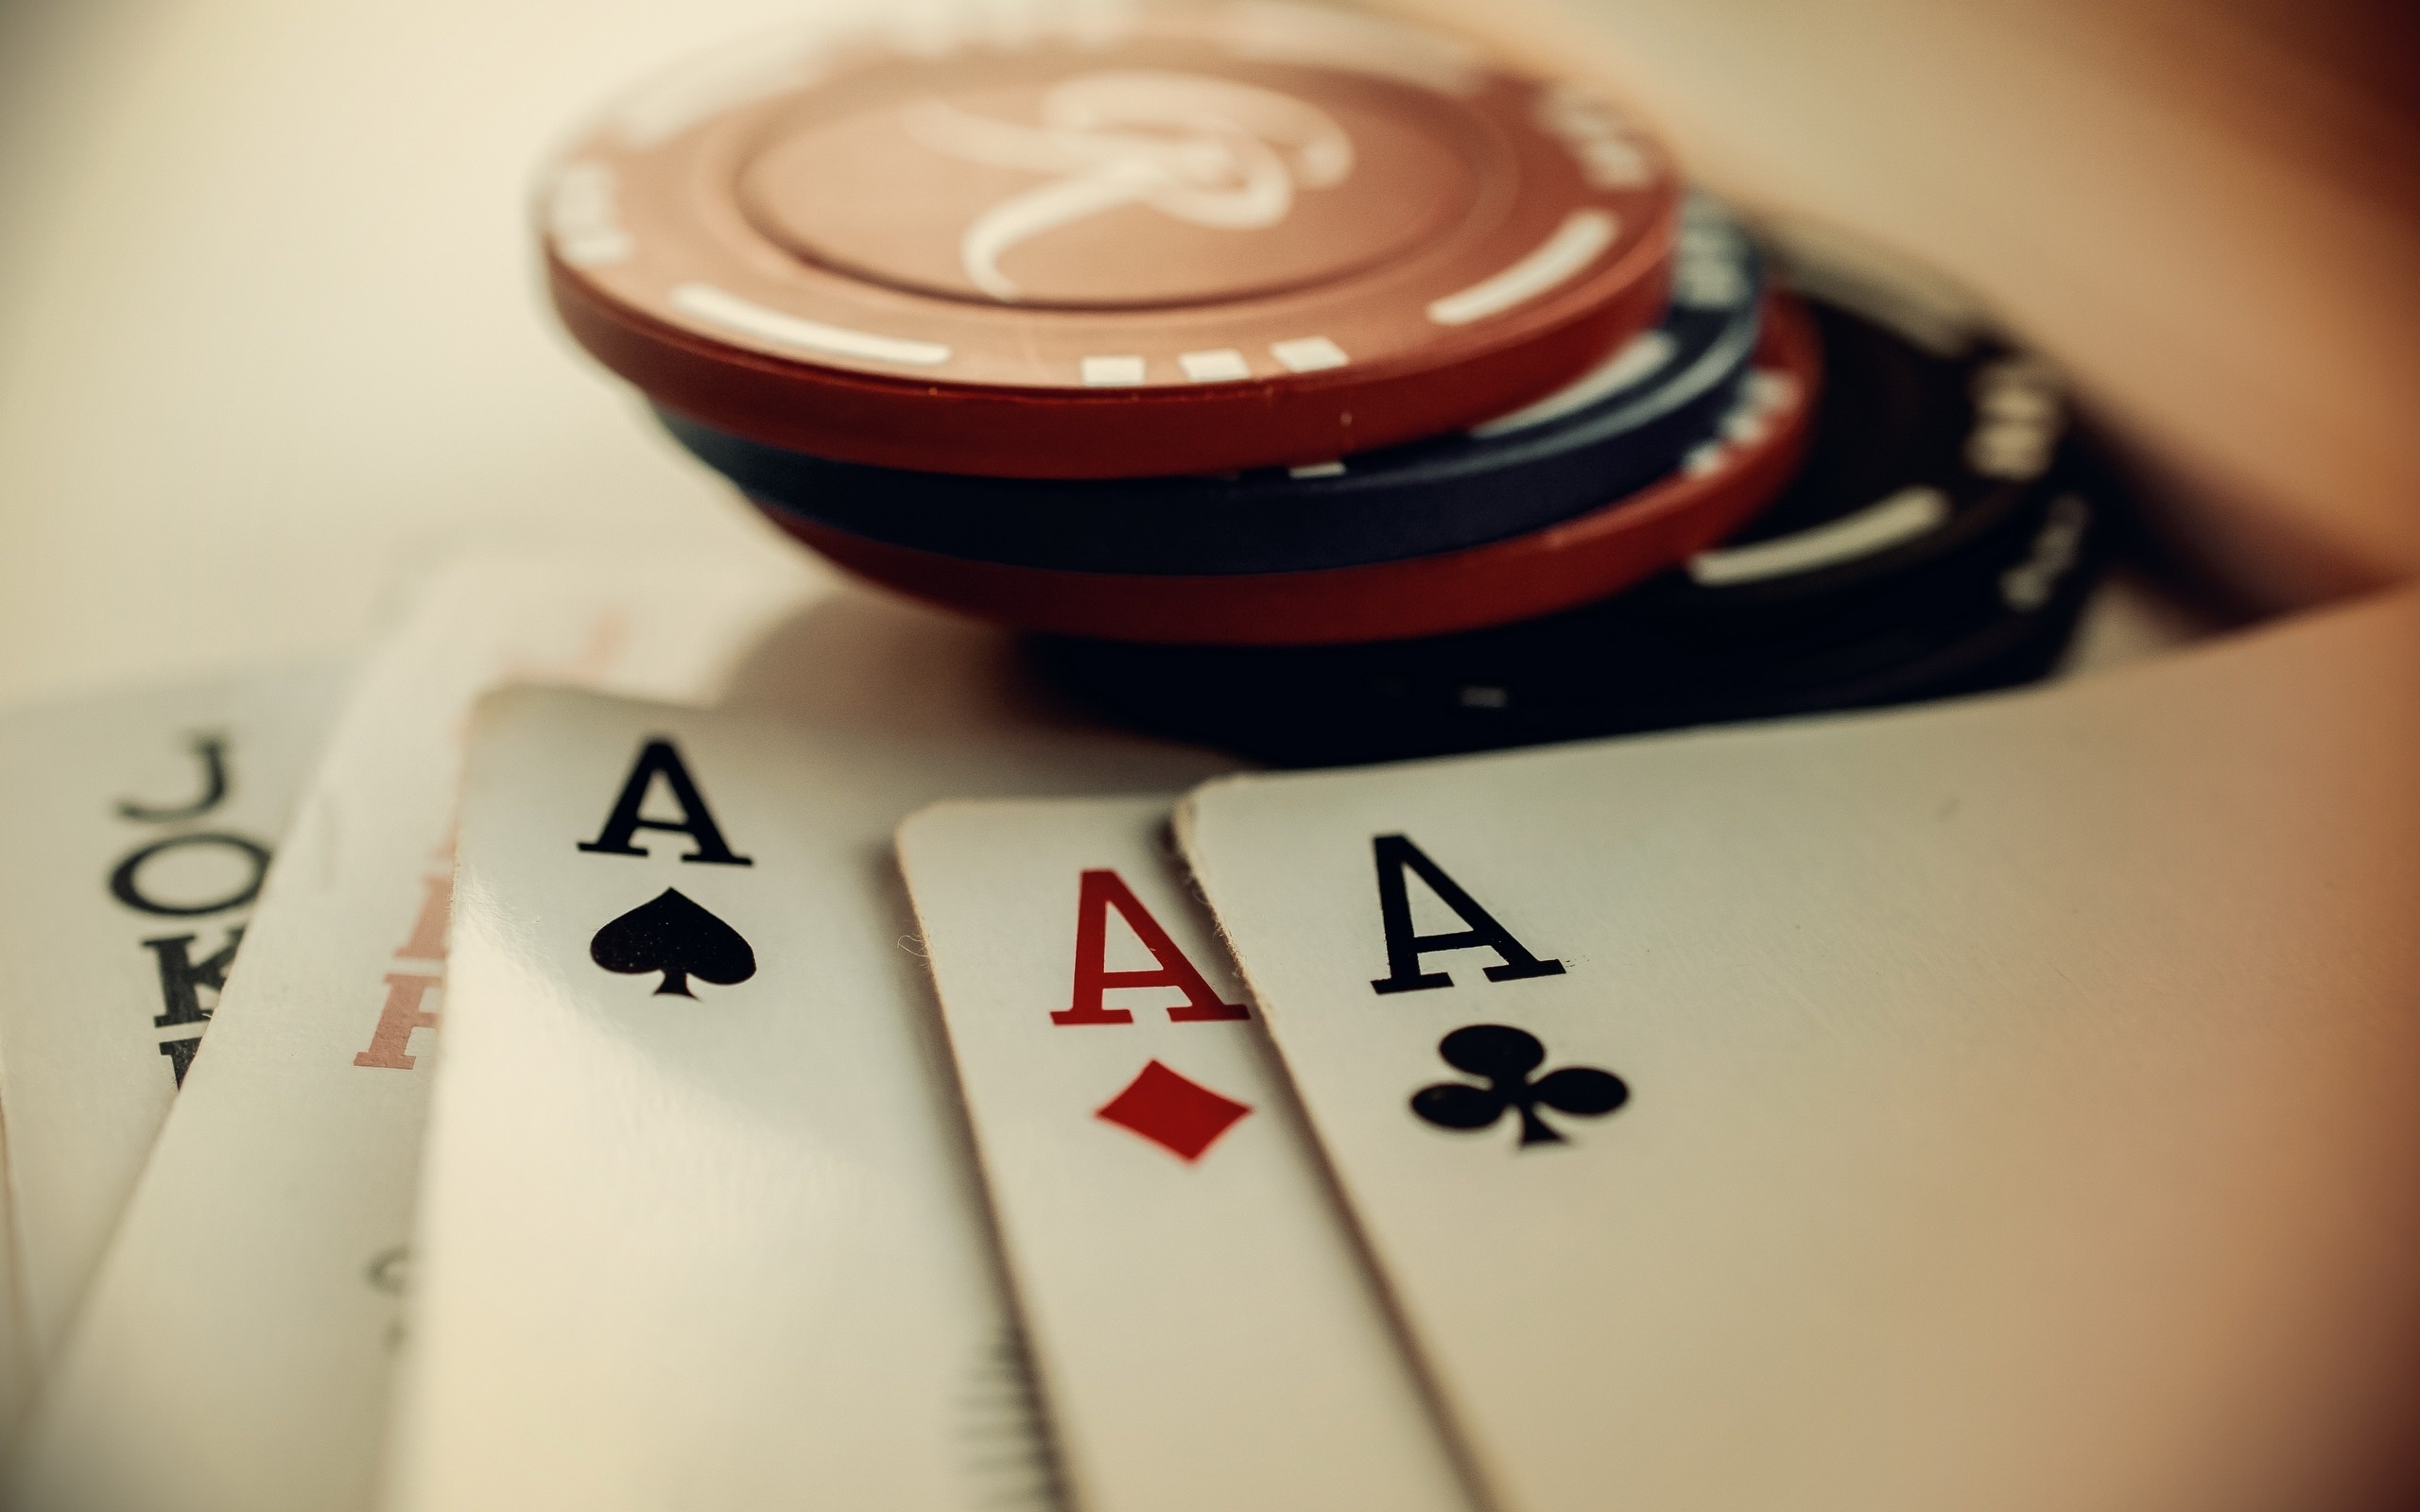 Poker: Three aces, AAA, Card combinations, Chip colors, Standard values. 2560x1600 HD Wallpaper.